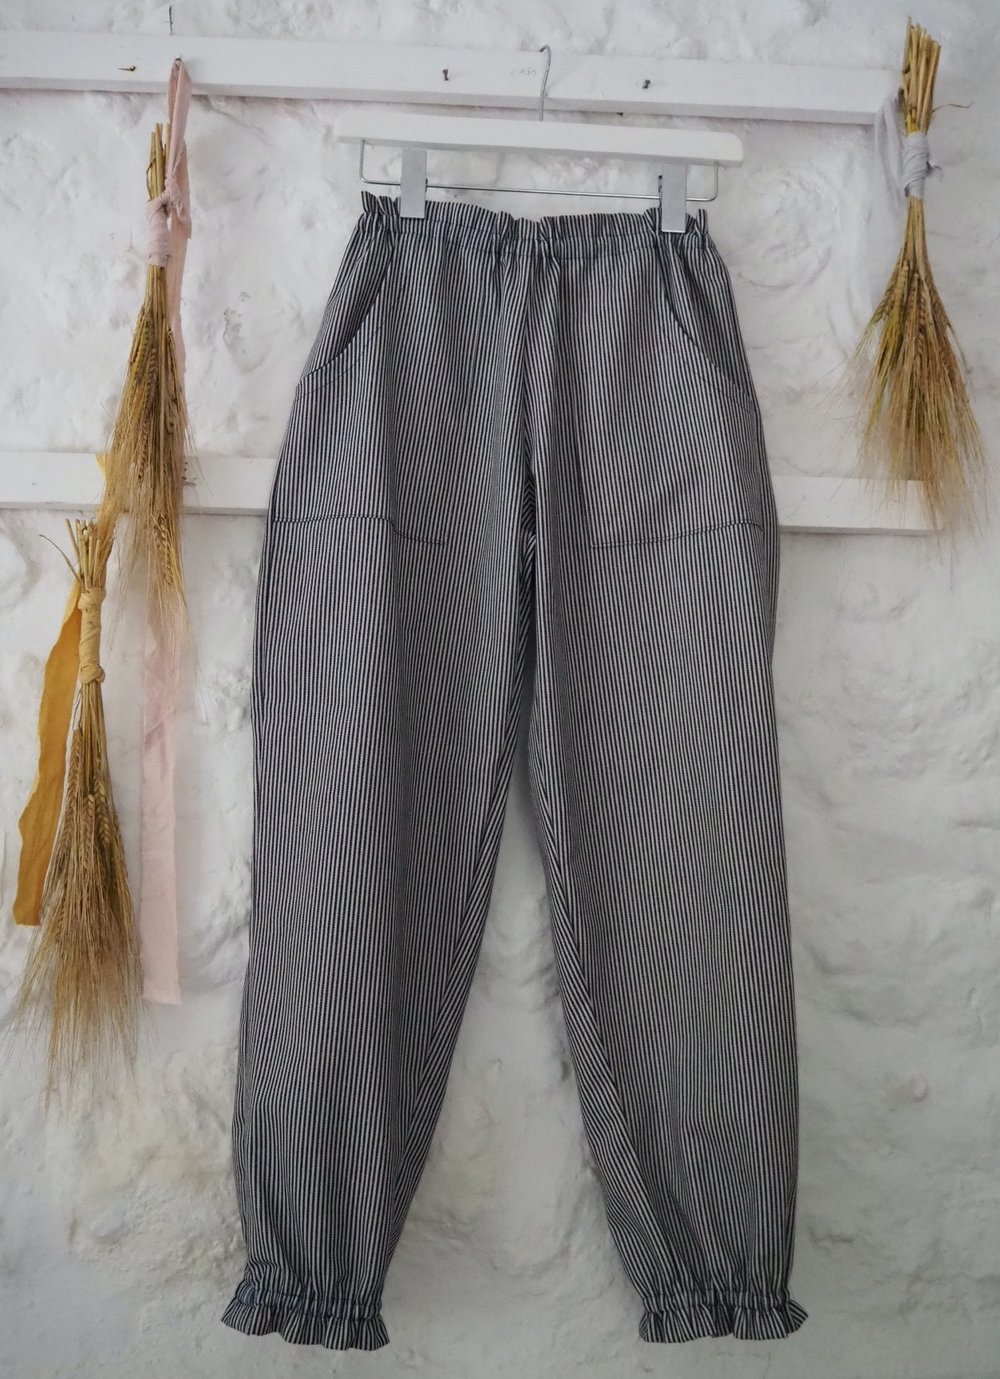 Image of Cotton joggers - extra small (8)